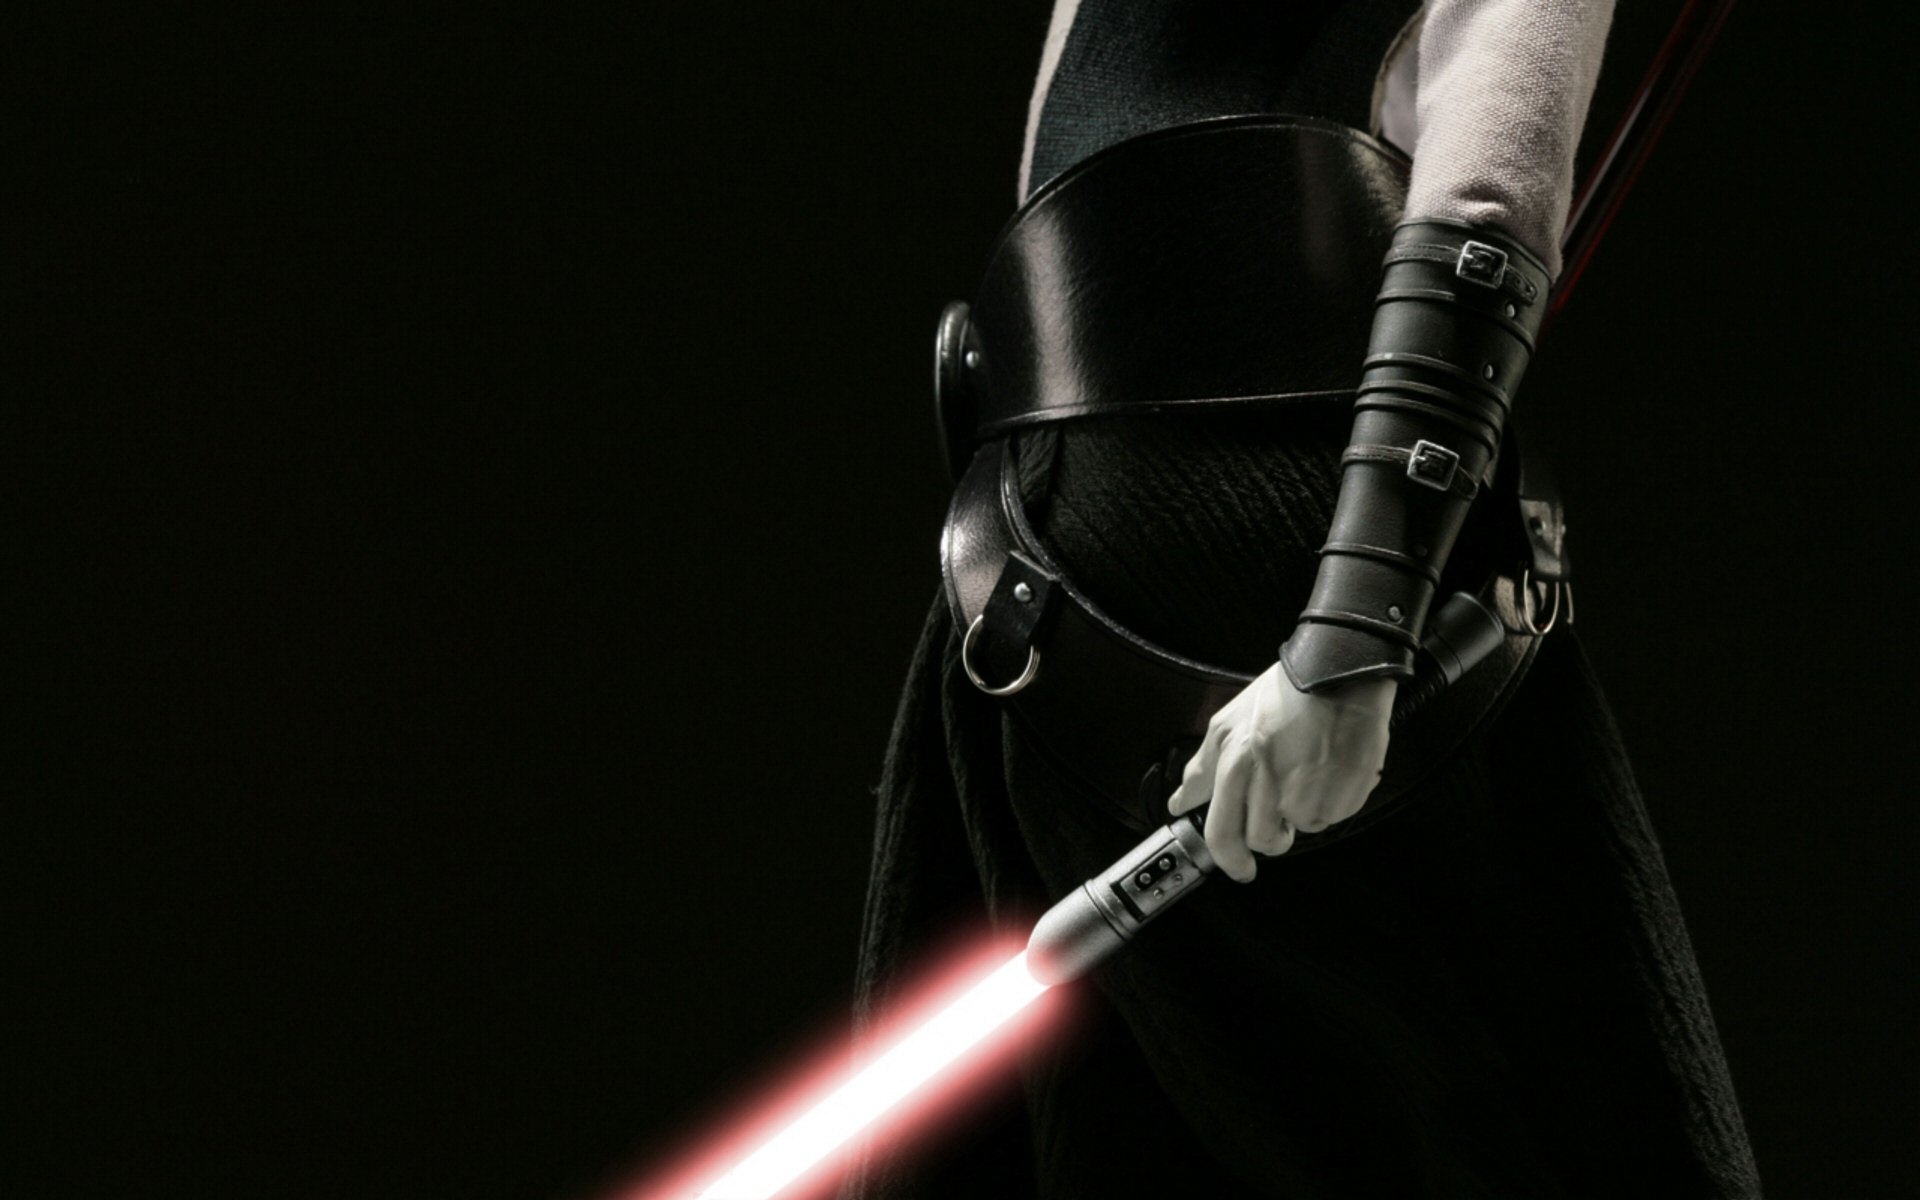 Download the Sith Lord Wallpaper Sith Lord iPhone Wallpaper Sith